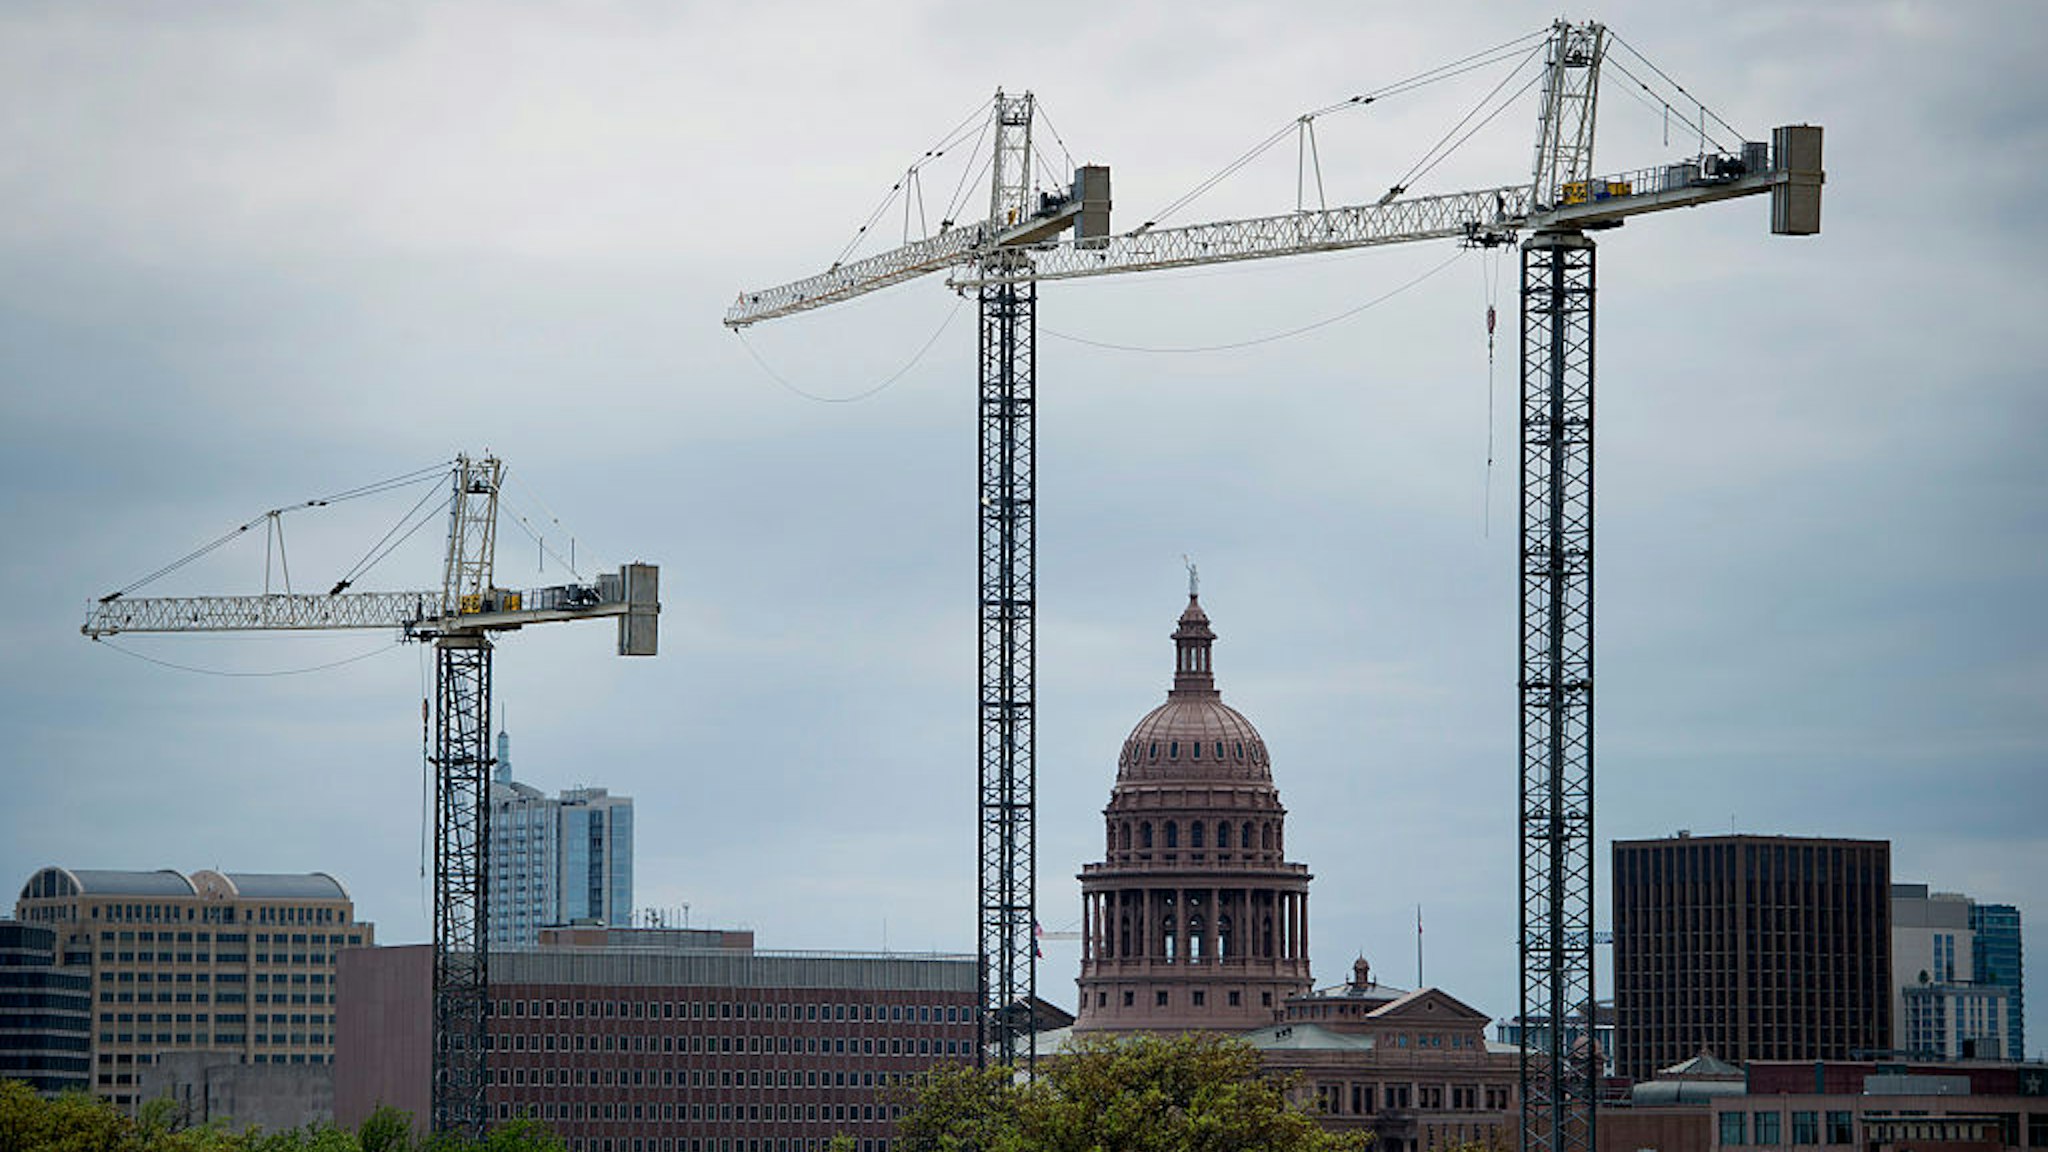 The Texas State Capitol building stands past construction cranes at the University of Texas at Austin campus in Austin, Texas, U.S., on Saturday, April 4, 2015. About 900,000 people live in the city of Austin and that number is expected to reach nearly 1.3 million by 2040, a 40 percent increase, according to city figures. More than 100 people move to the city a day, according to the city's demographer.